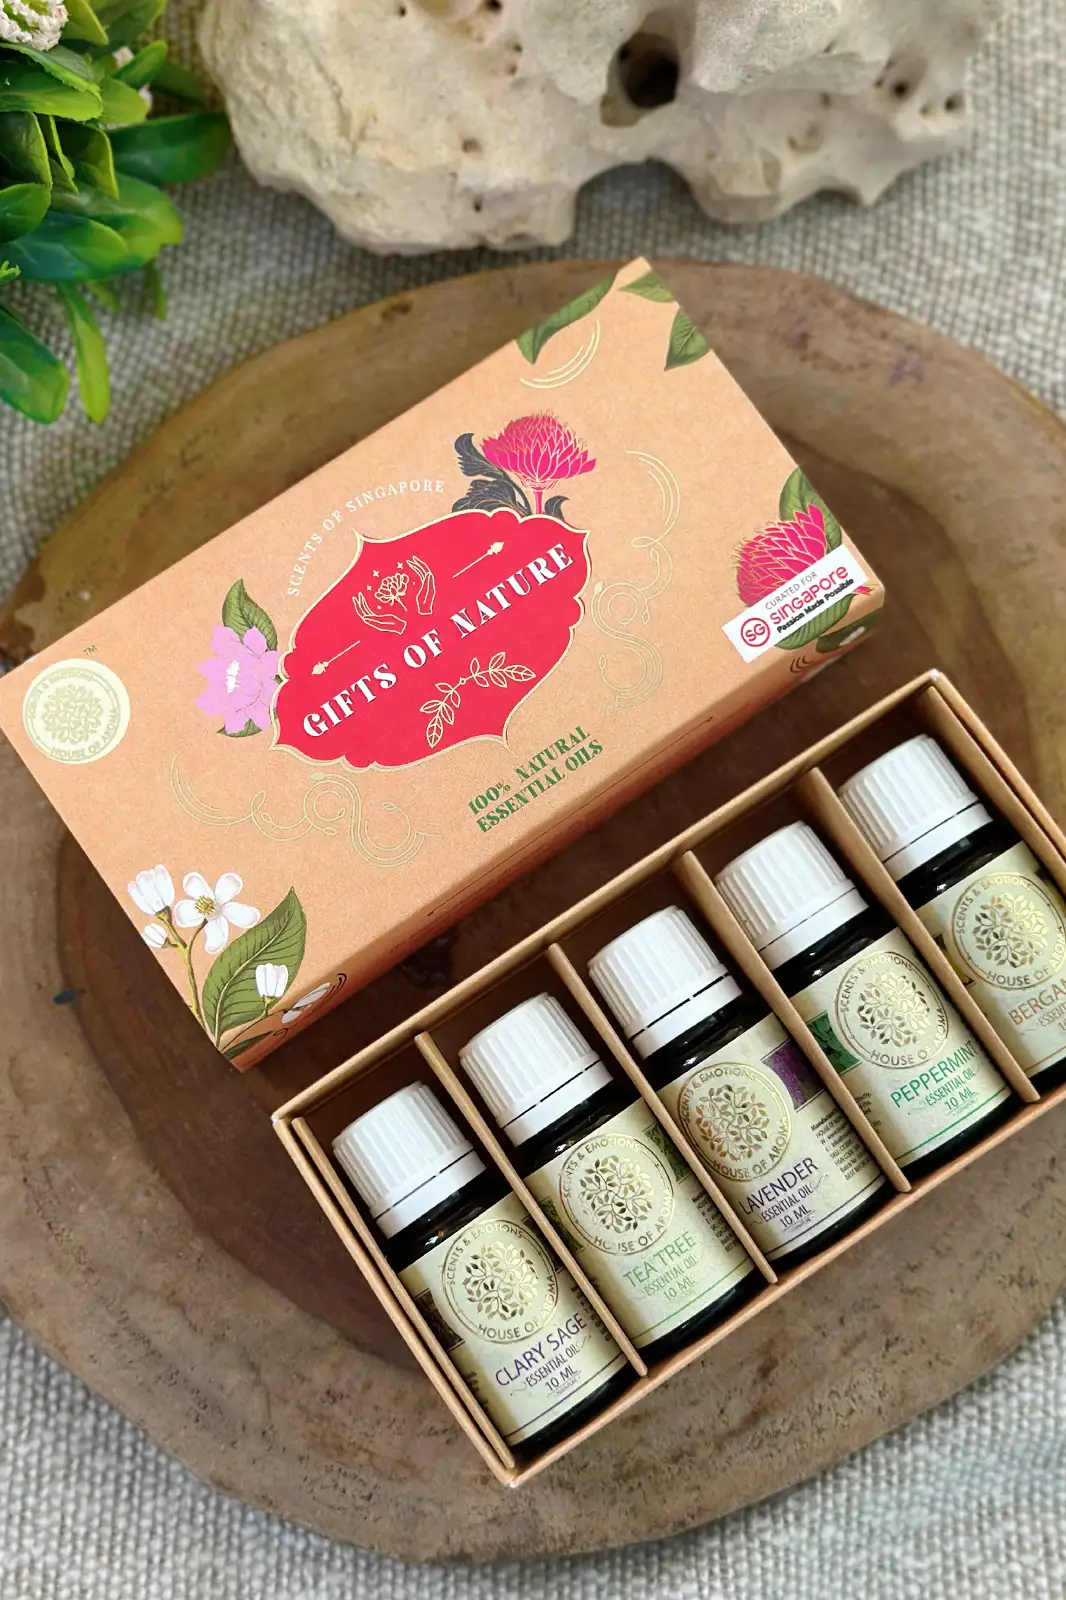 Natural essential oil gift set, essential oil gift set, gift set, essential oil, essential oil gift box, gift set for couple, women gift set, gift set box, gift set for diffuser, aroma gift set, gift set, festive gift, tea tree essential oils, cosmetic gift set, anniversary gift set, House Of Aroma